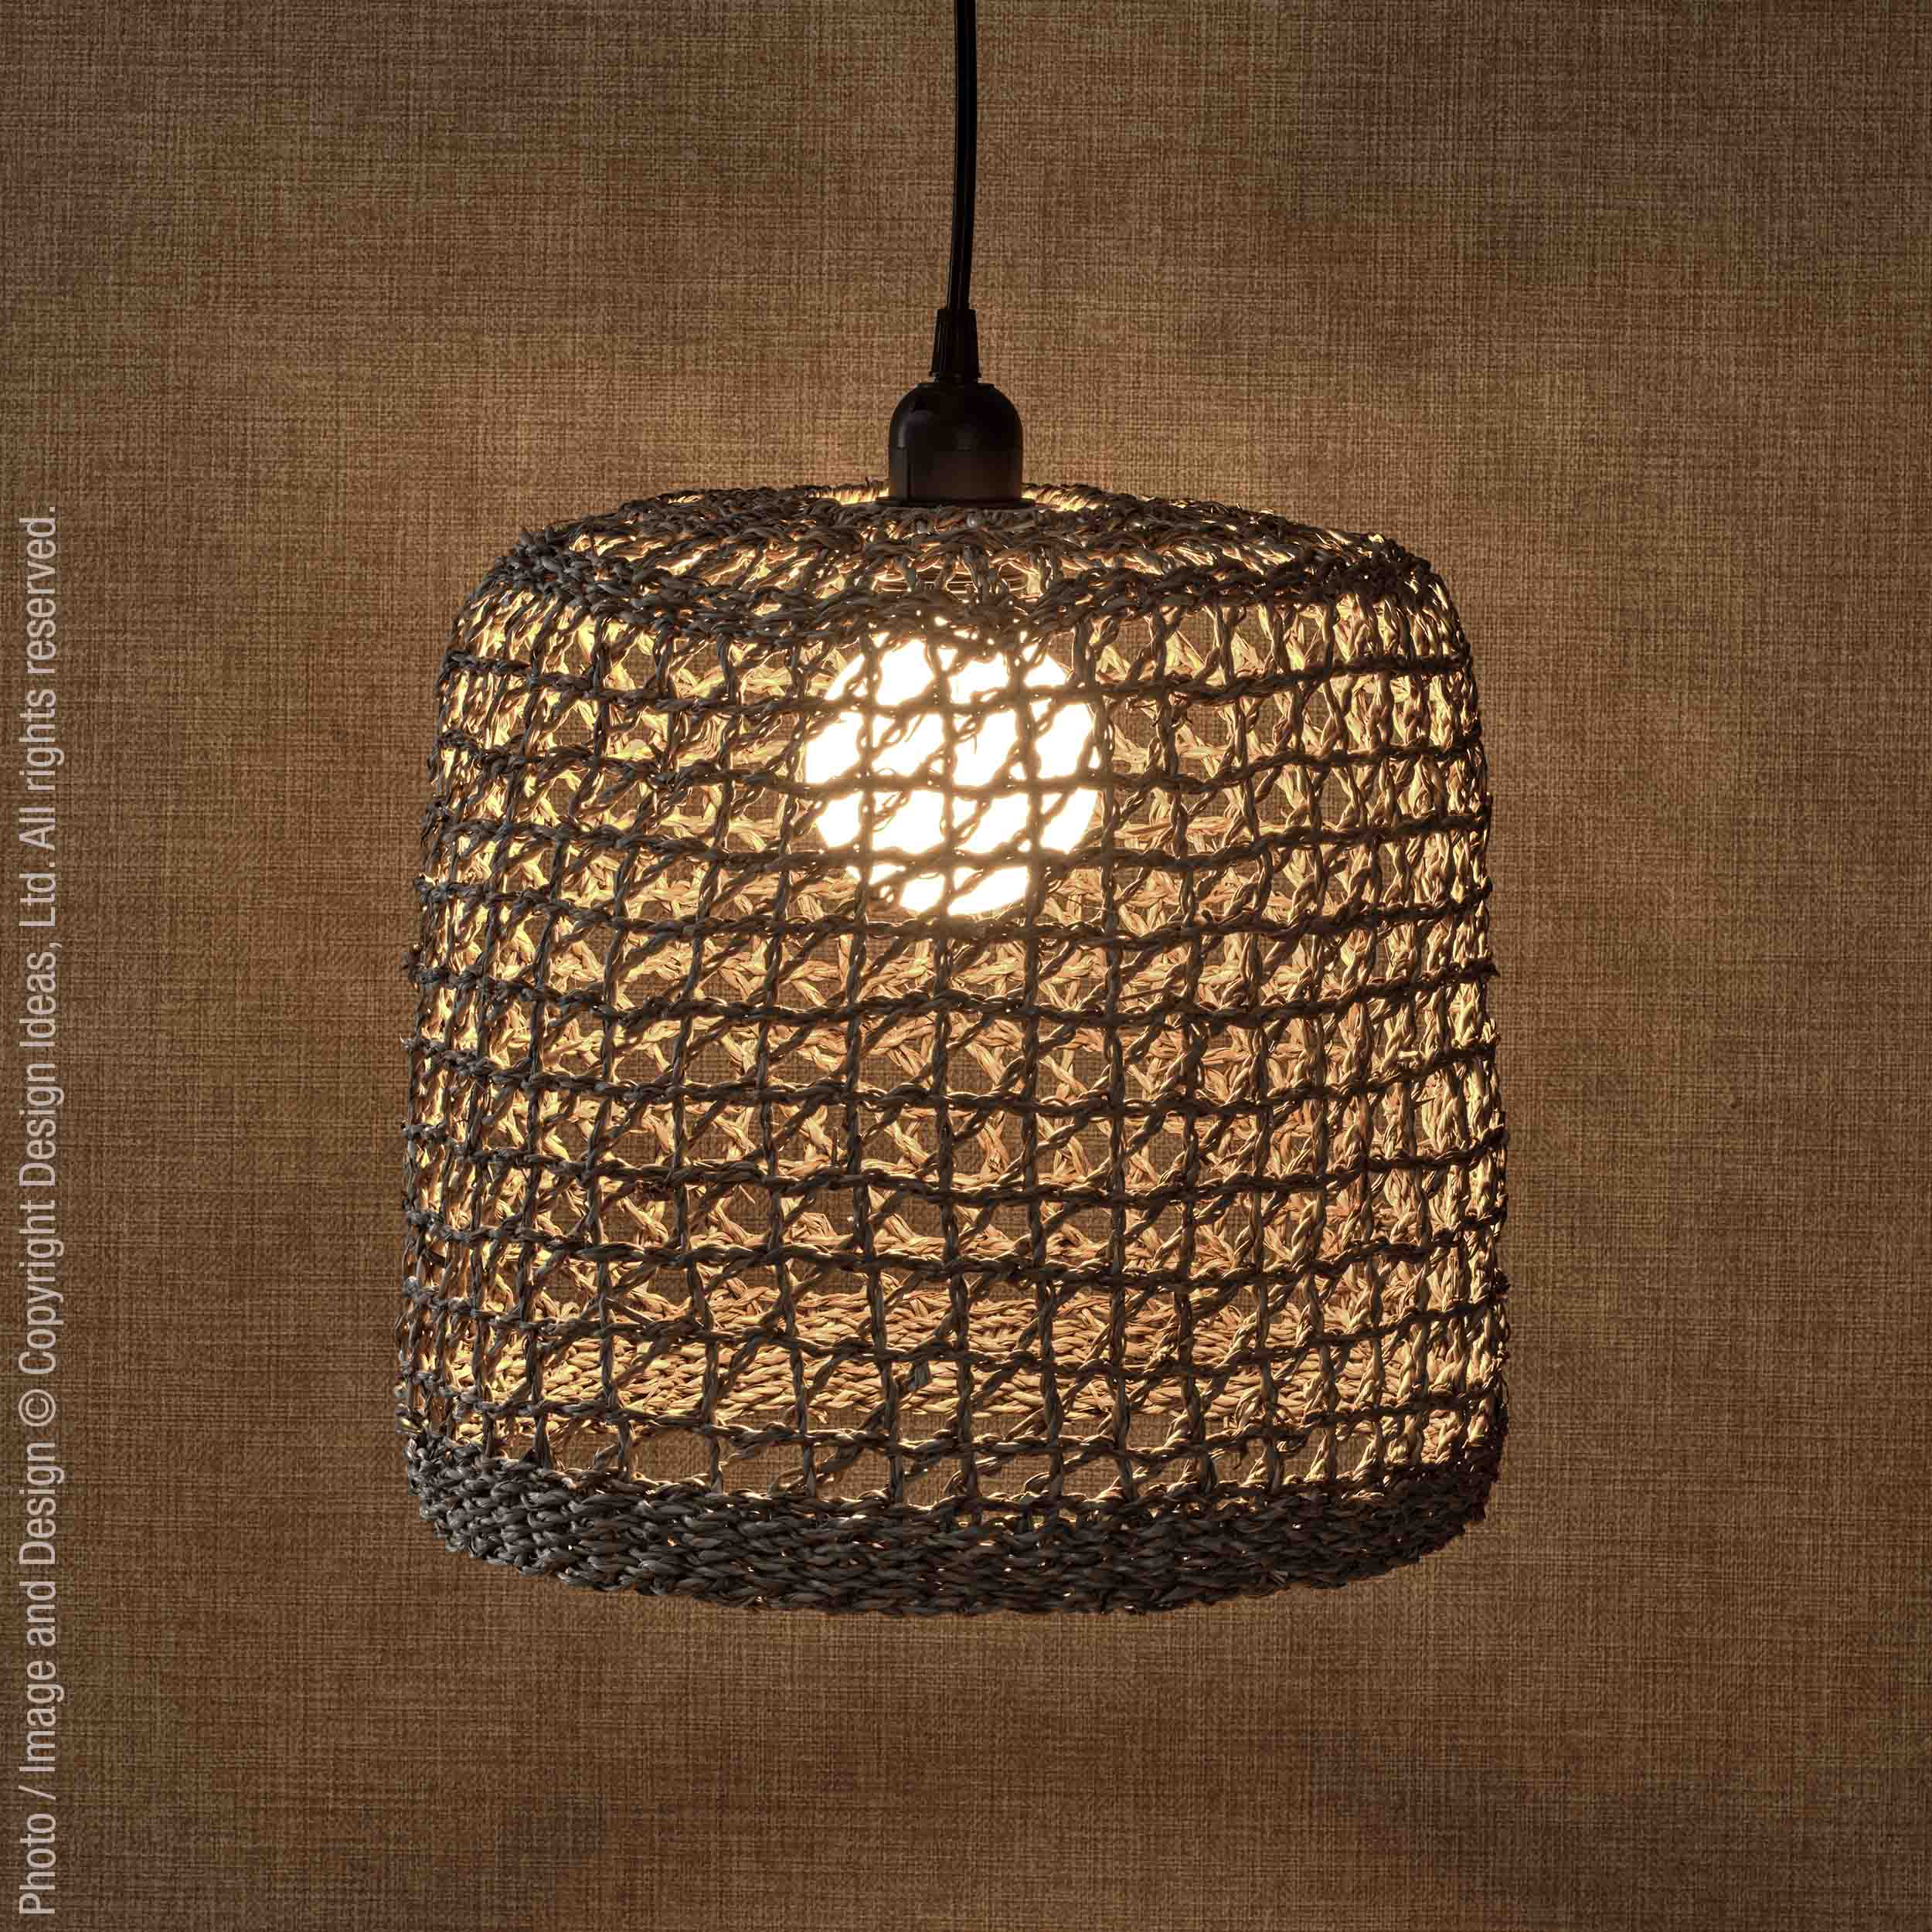 Barletta™ lampshade - Natural | Image 2 | Premium Lampshade from the Barletta collection | made with Sea Grass for long lasting use | texxture